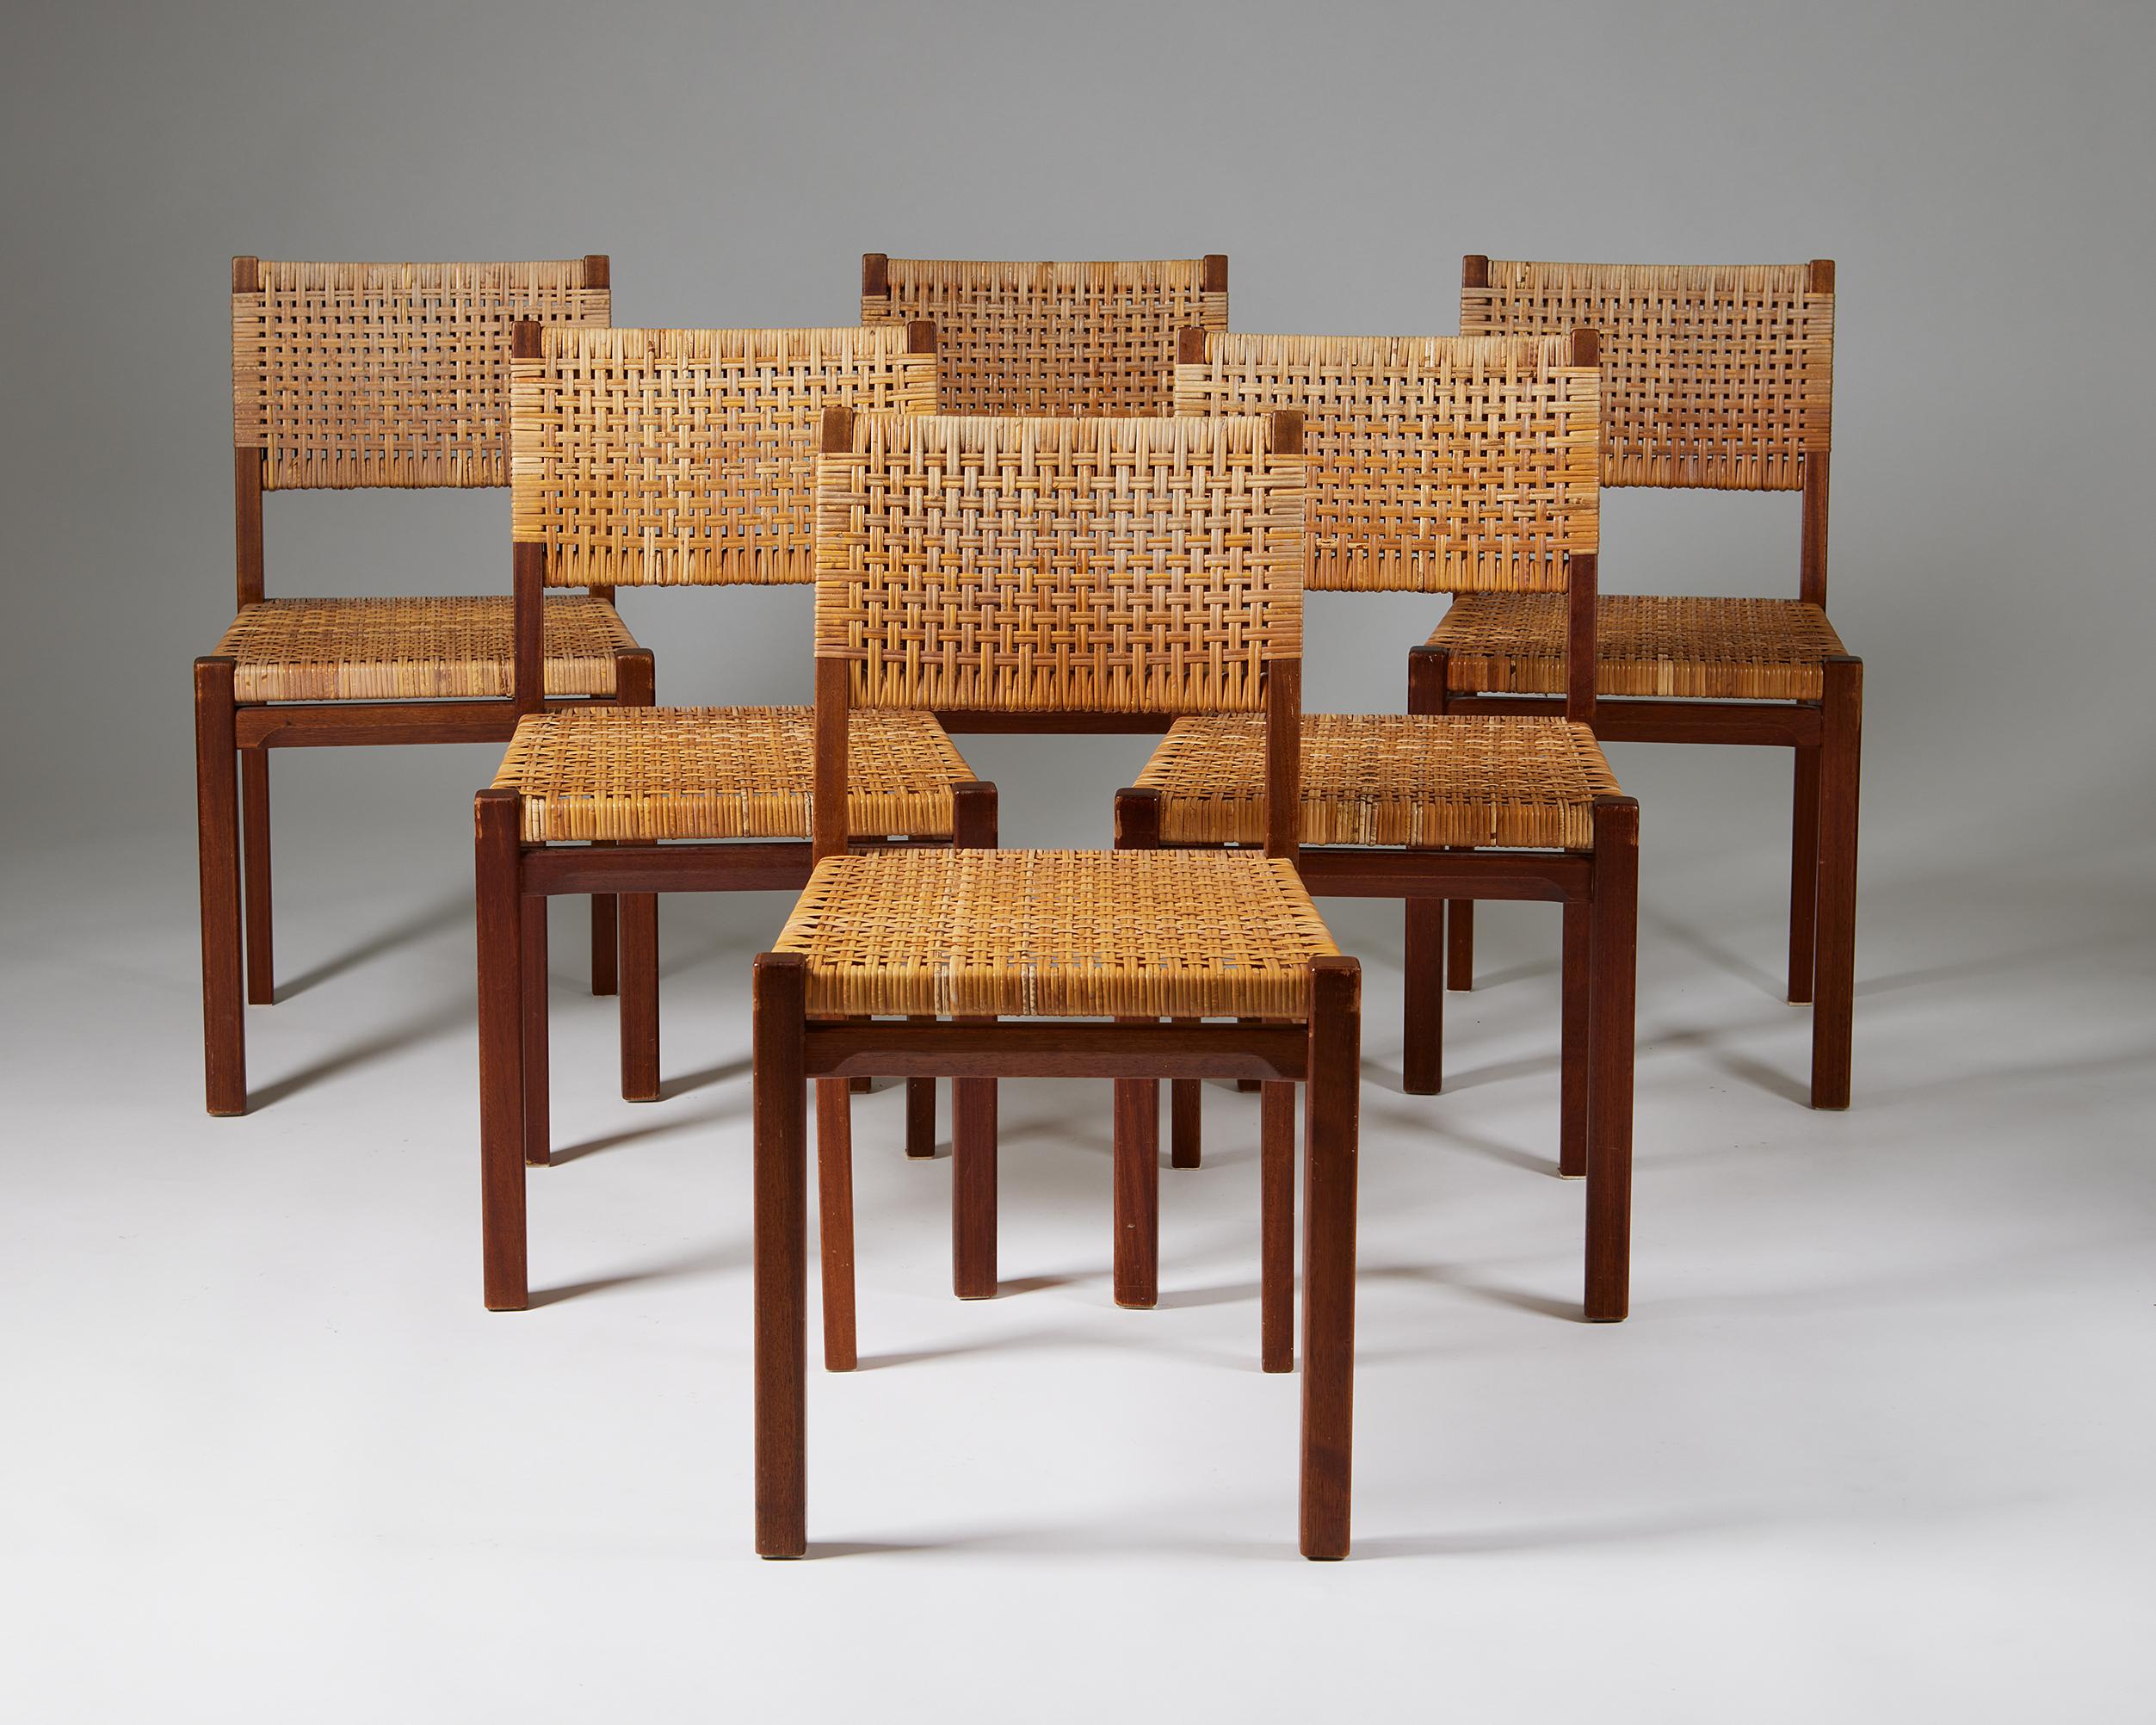 Set of six dining chairs designed by Aino Aalto,
Finland. 1950s.
Teak and cane.

Measures: H: 80 cm / 2' 7 1/2''
W: 44 cm / 17 1/4''
D: 45 cm / 17 3/4''
SH: 45 cm / 17 3/4''.